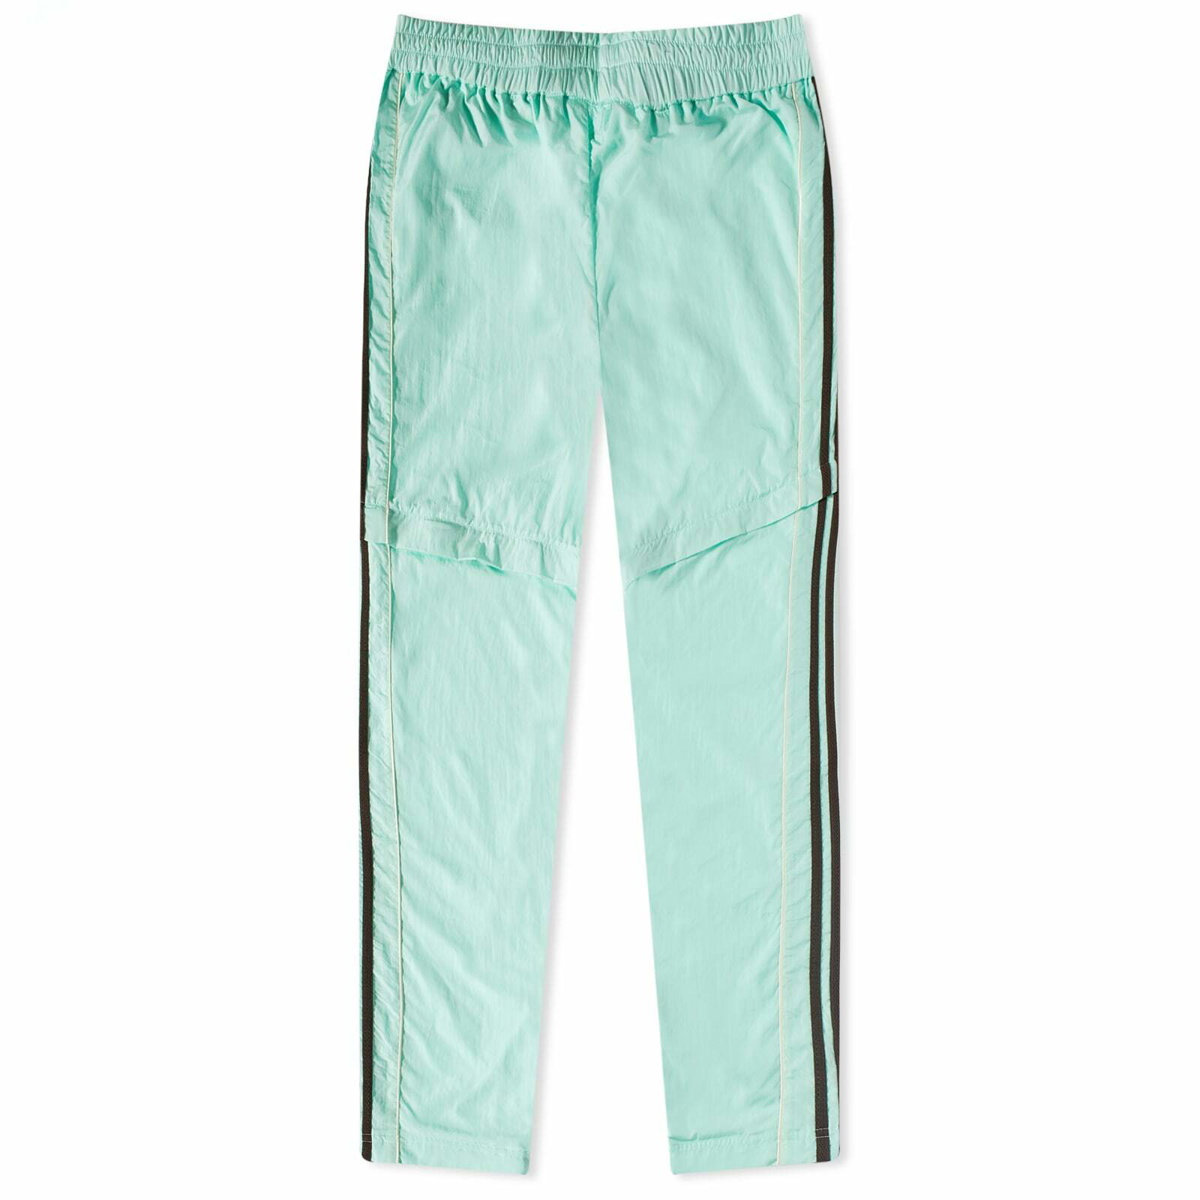 x Wales Bonner track pants in green - Adidas